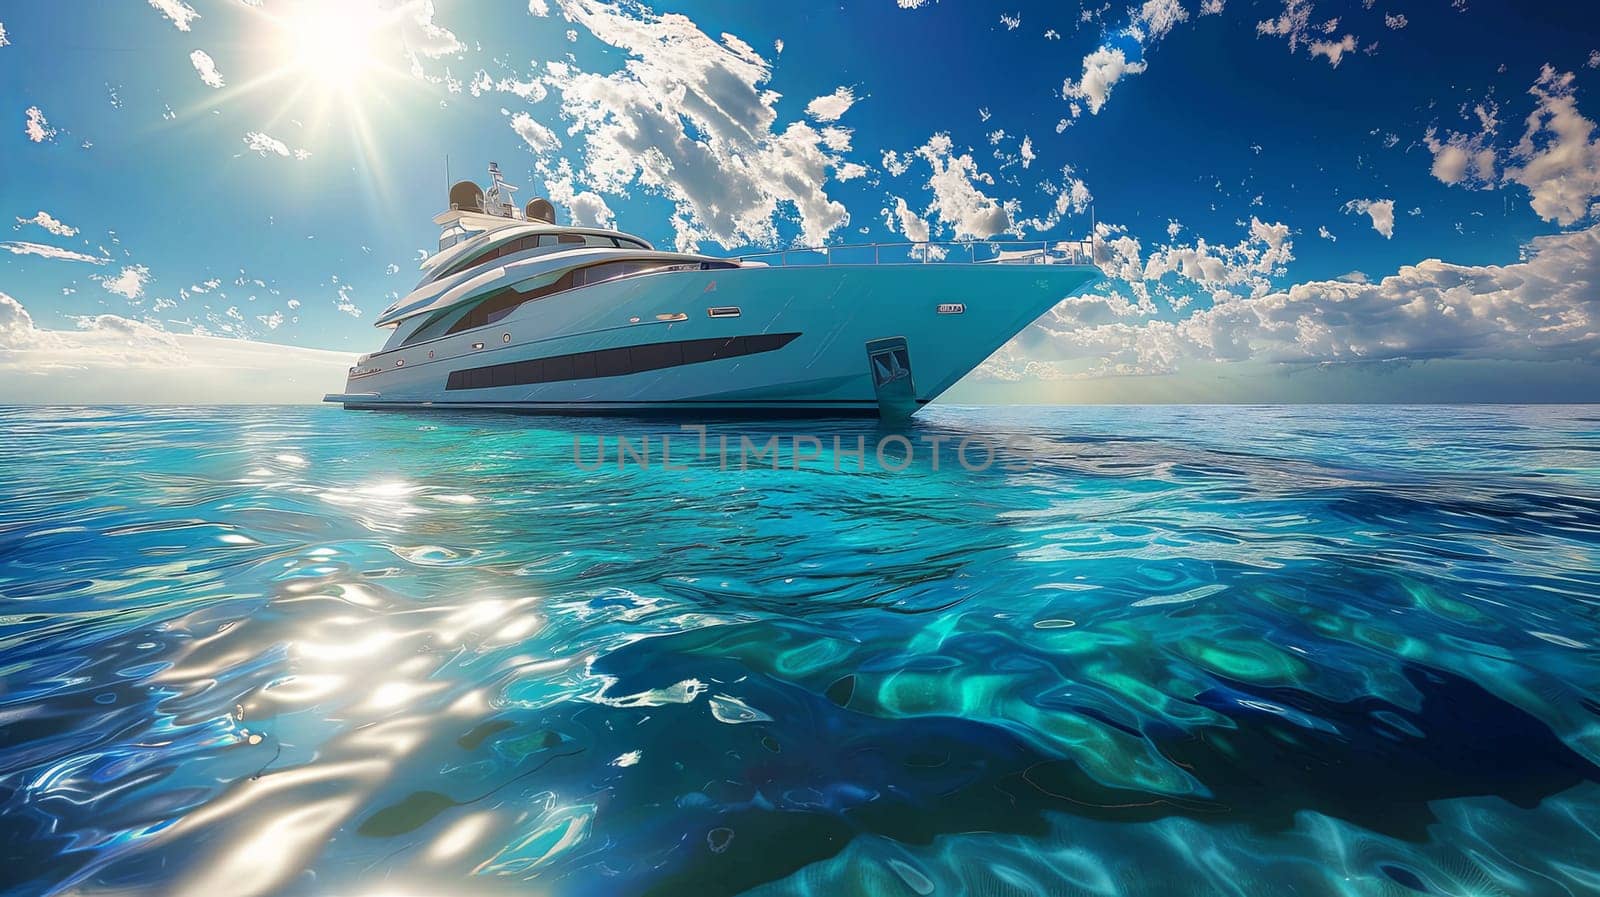 A luxurious white yacht peacefully glides across the tranquil lagoon, reflecting the clear blue sky on the pristine water below.